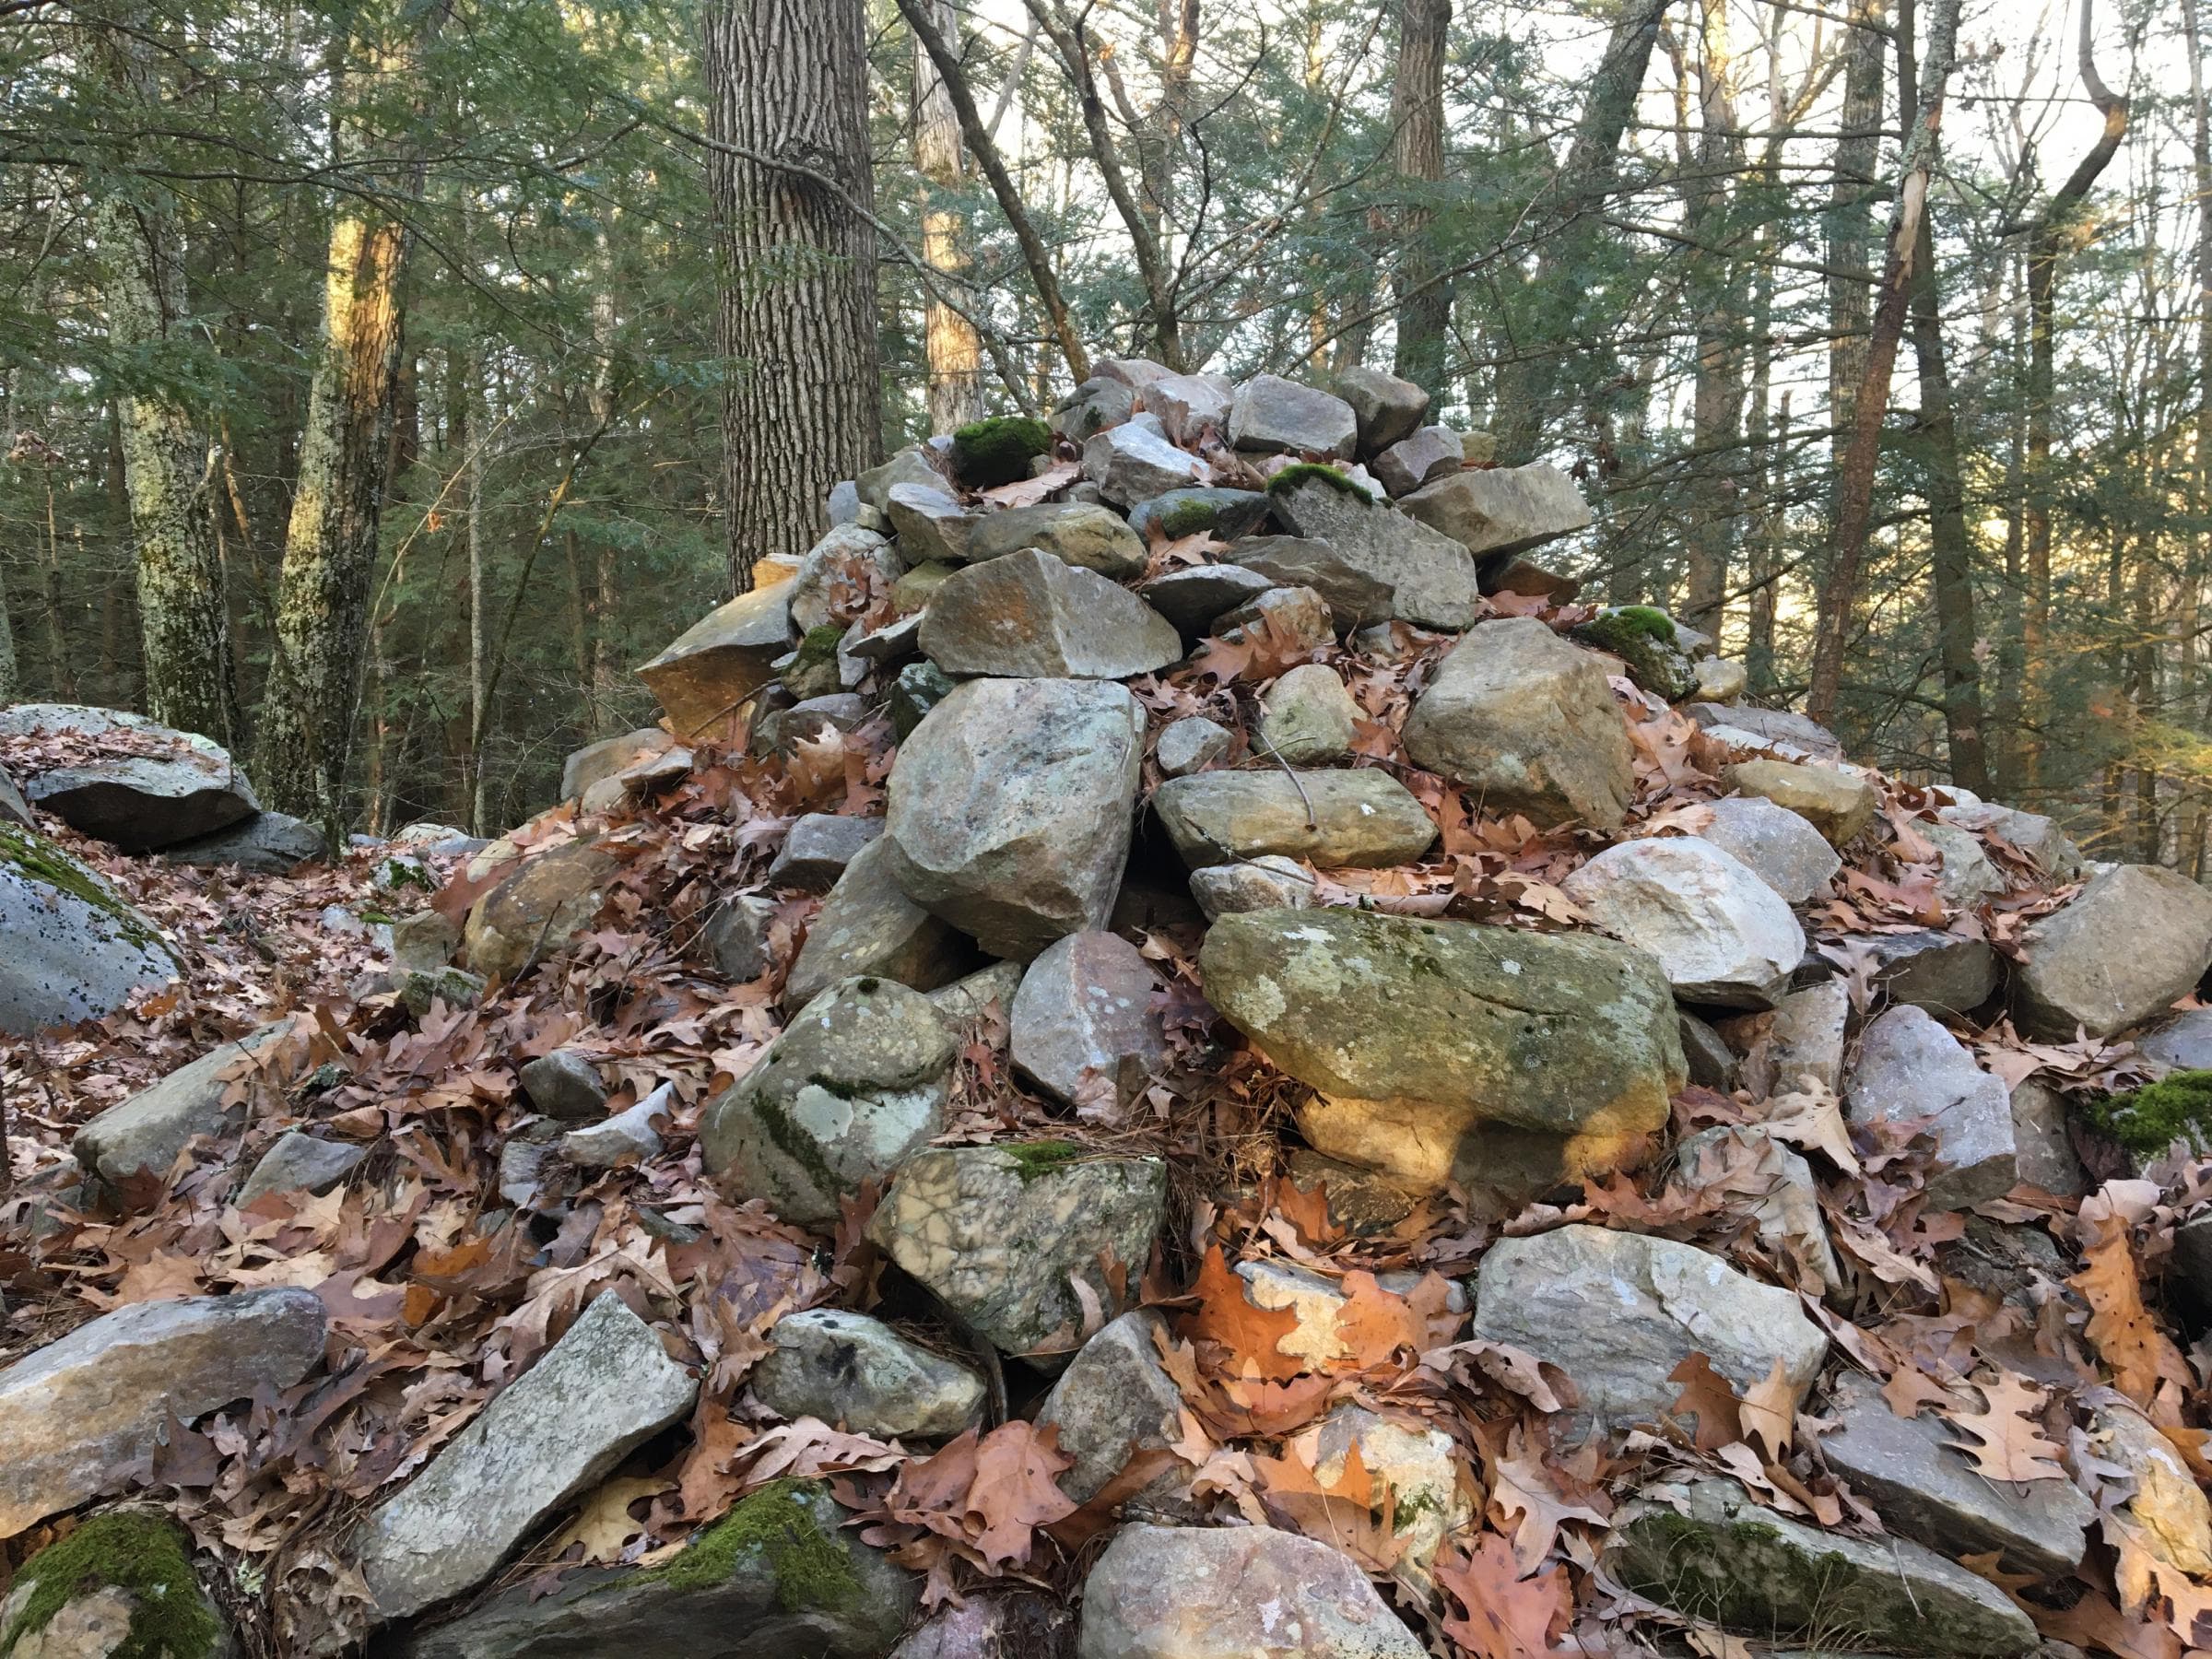 A cairn on Monument Mountain, where the Stockbridge Mohicans left stones in the 1700s. It was looted in 1840 and later reconfigured. (Nancy Eve Cohen/NEPM)